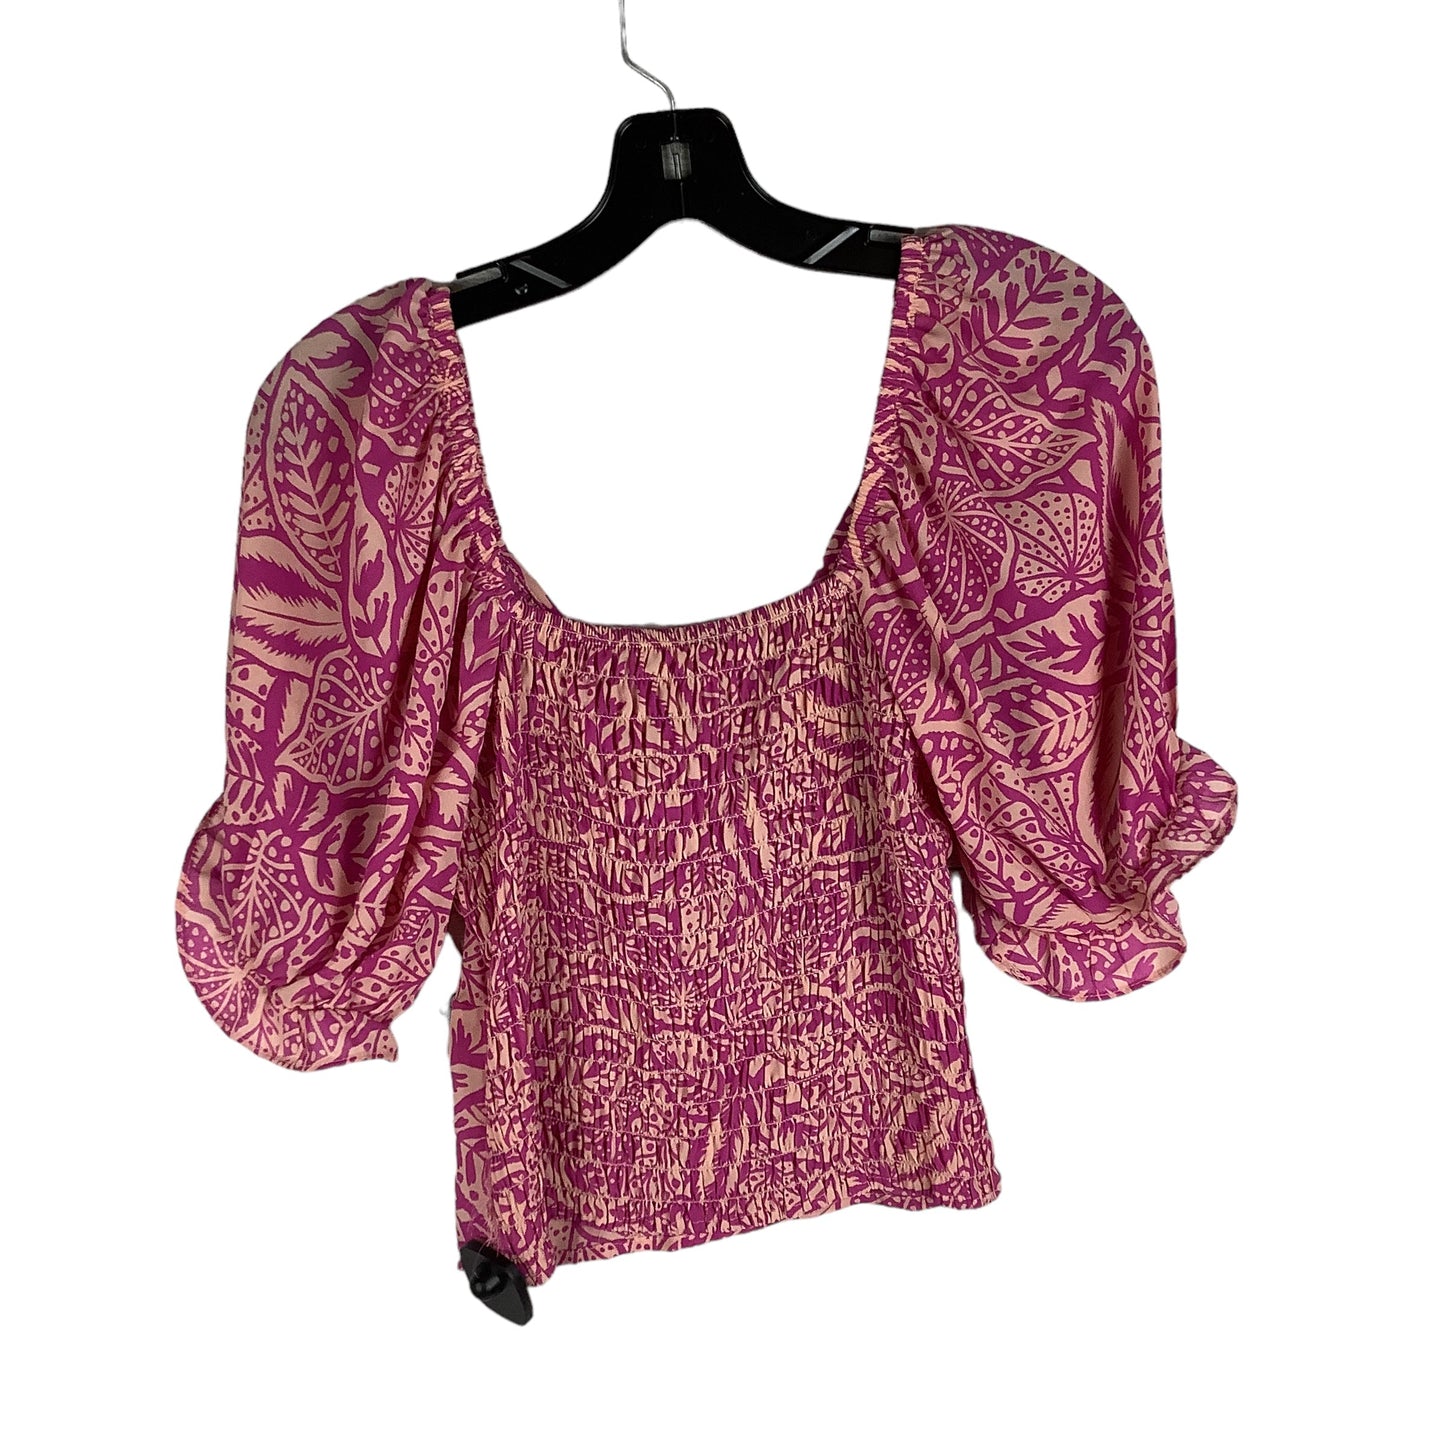 Pink Top Short Sleeve Sienna Sky, Size M